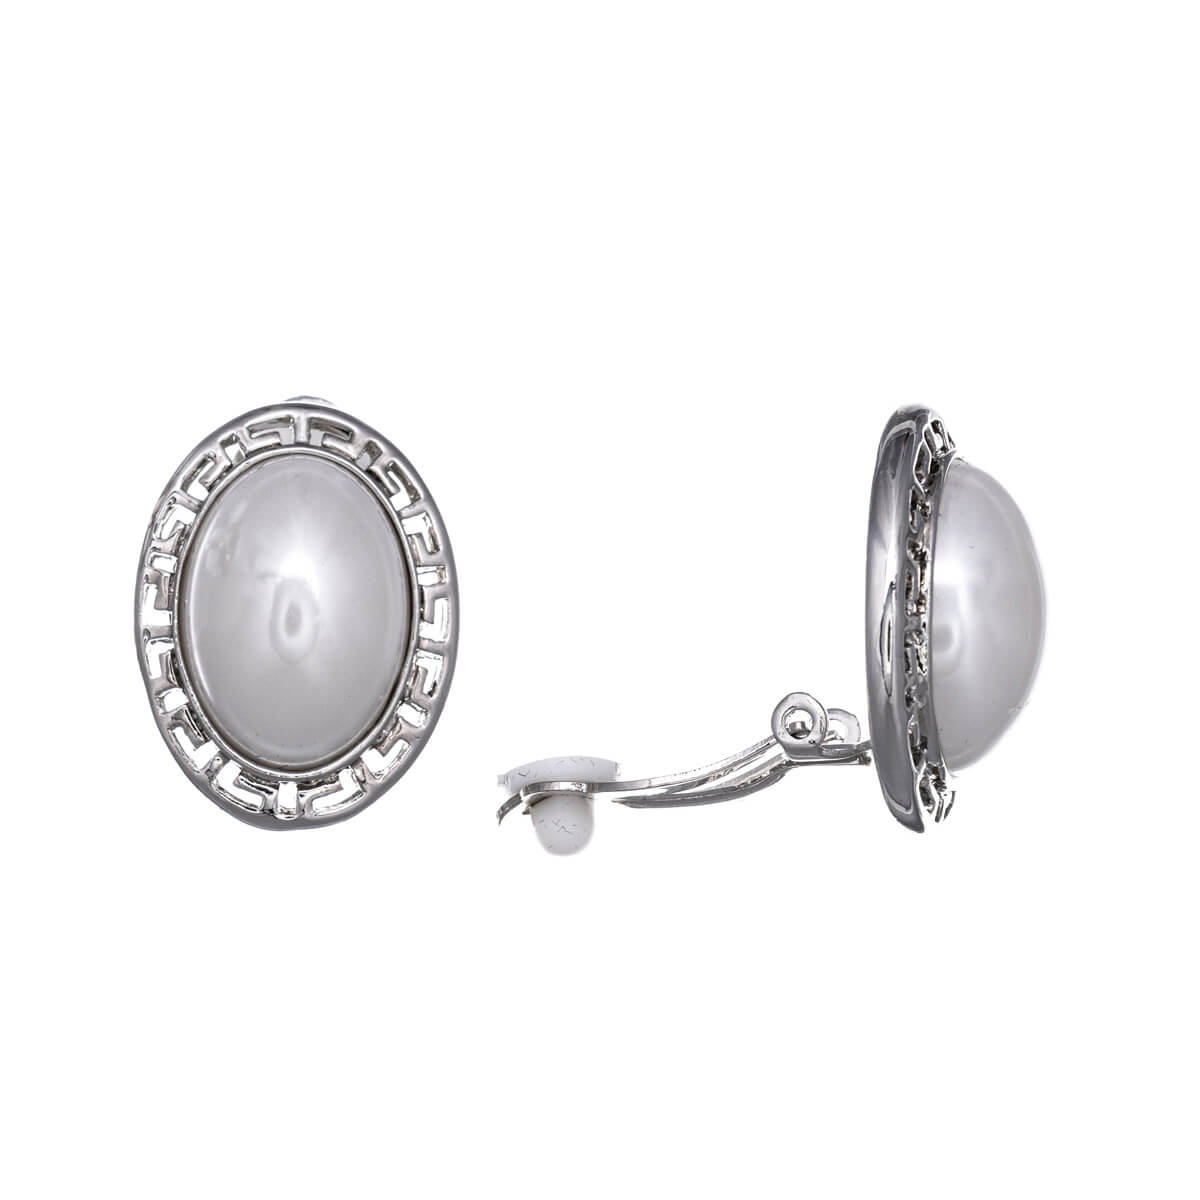 Decorative ovals pearl clip earrings